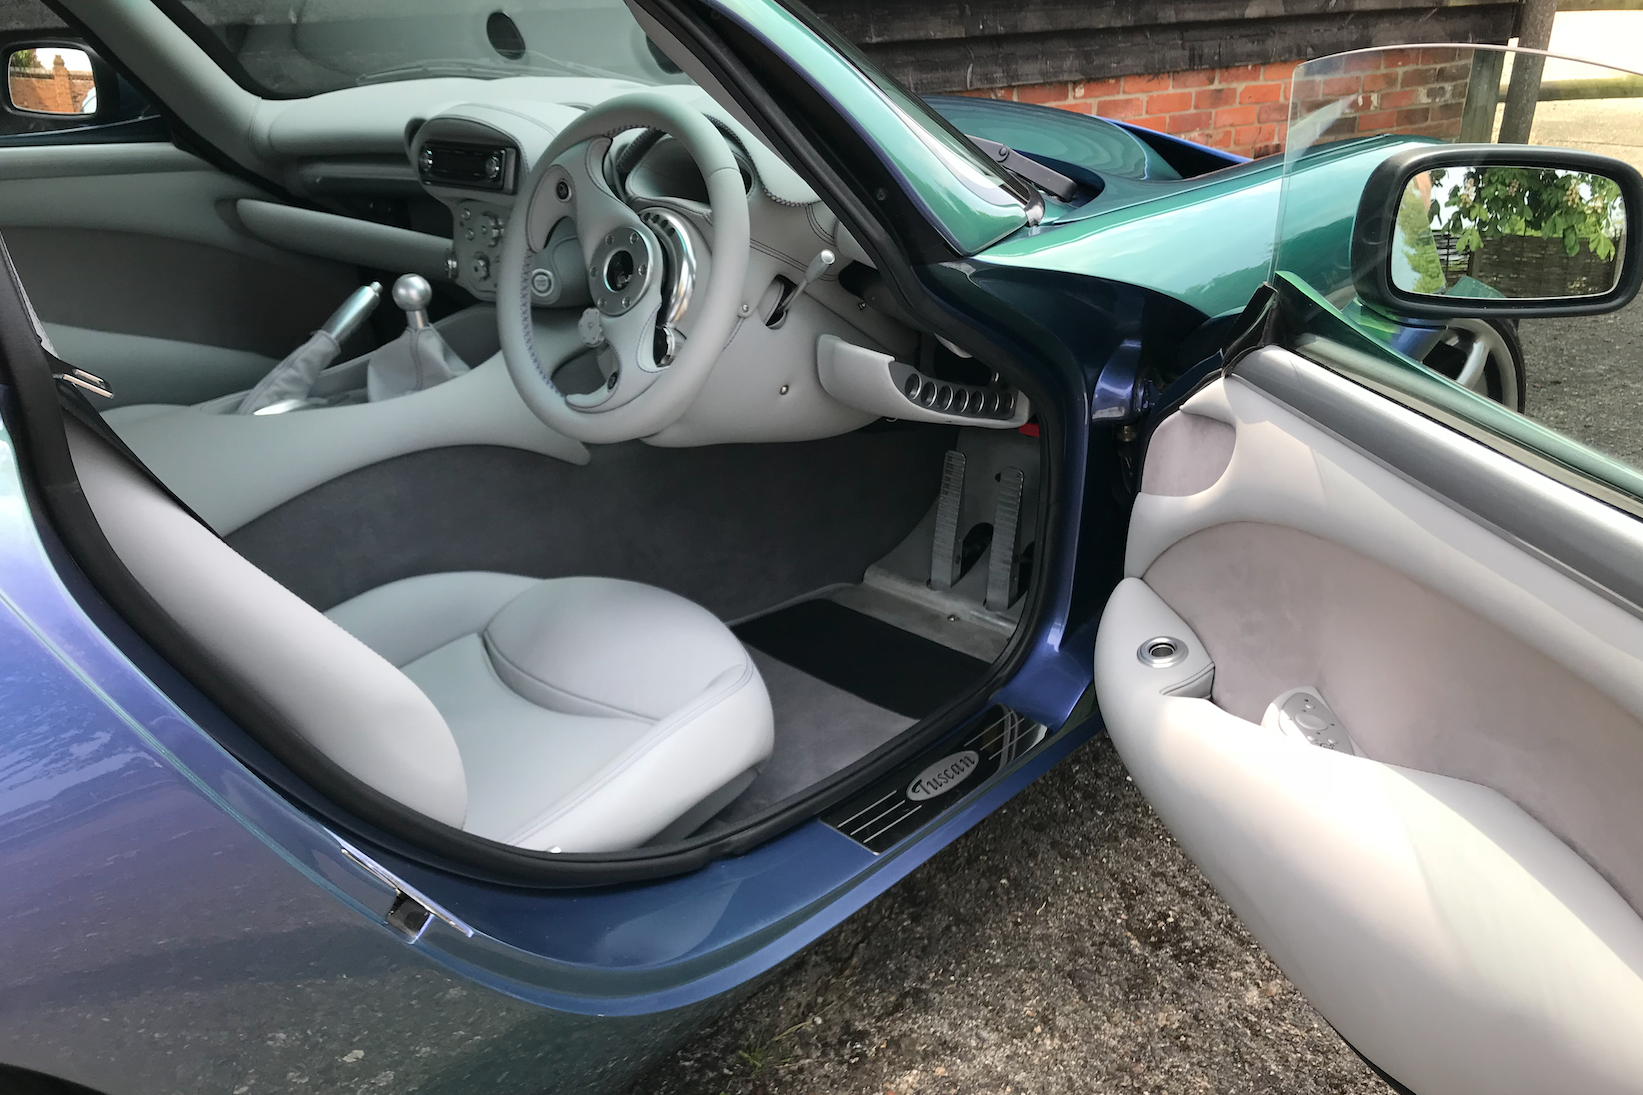 TVR Tuscan interior by SF Cartrim